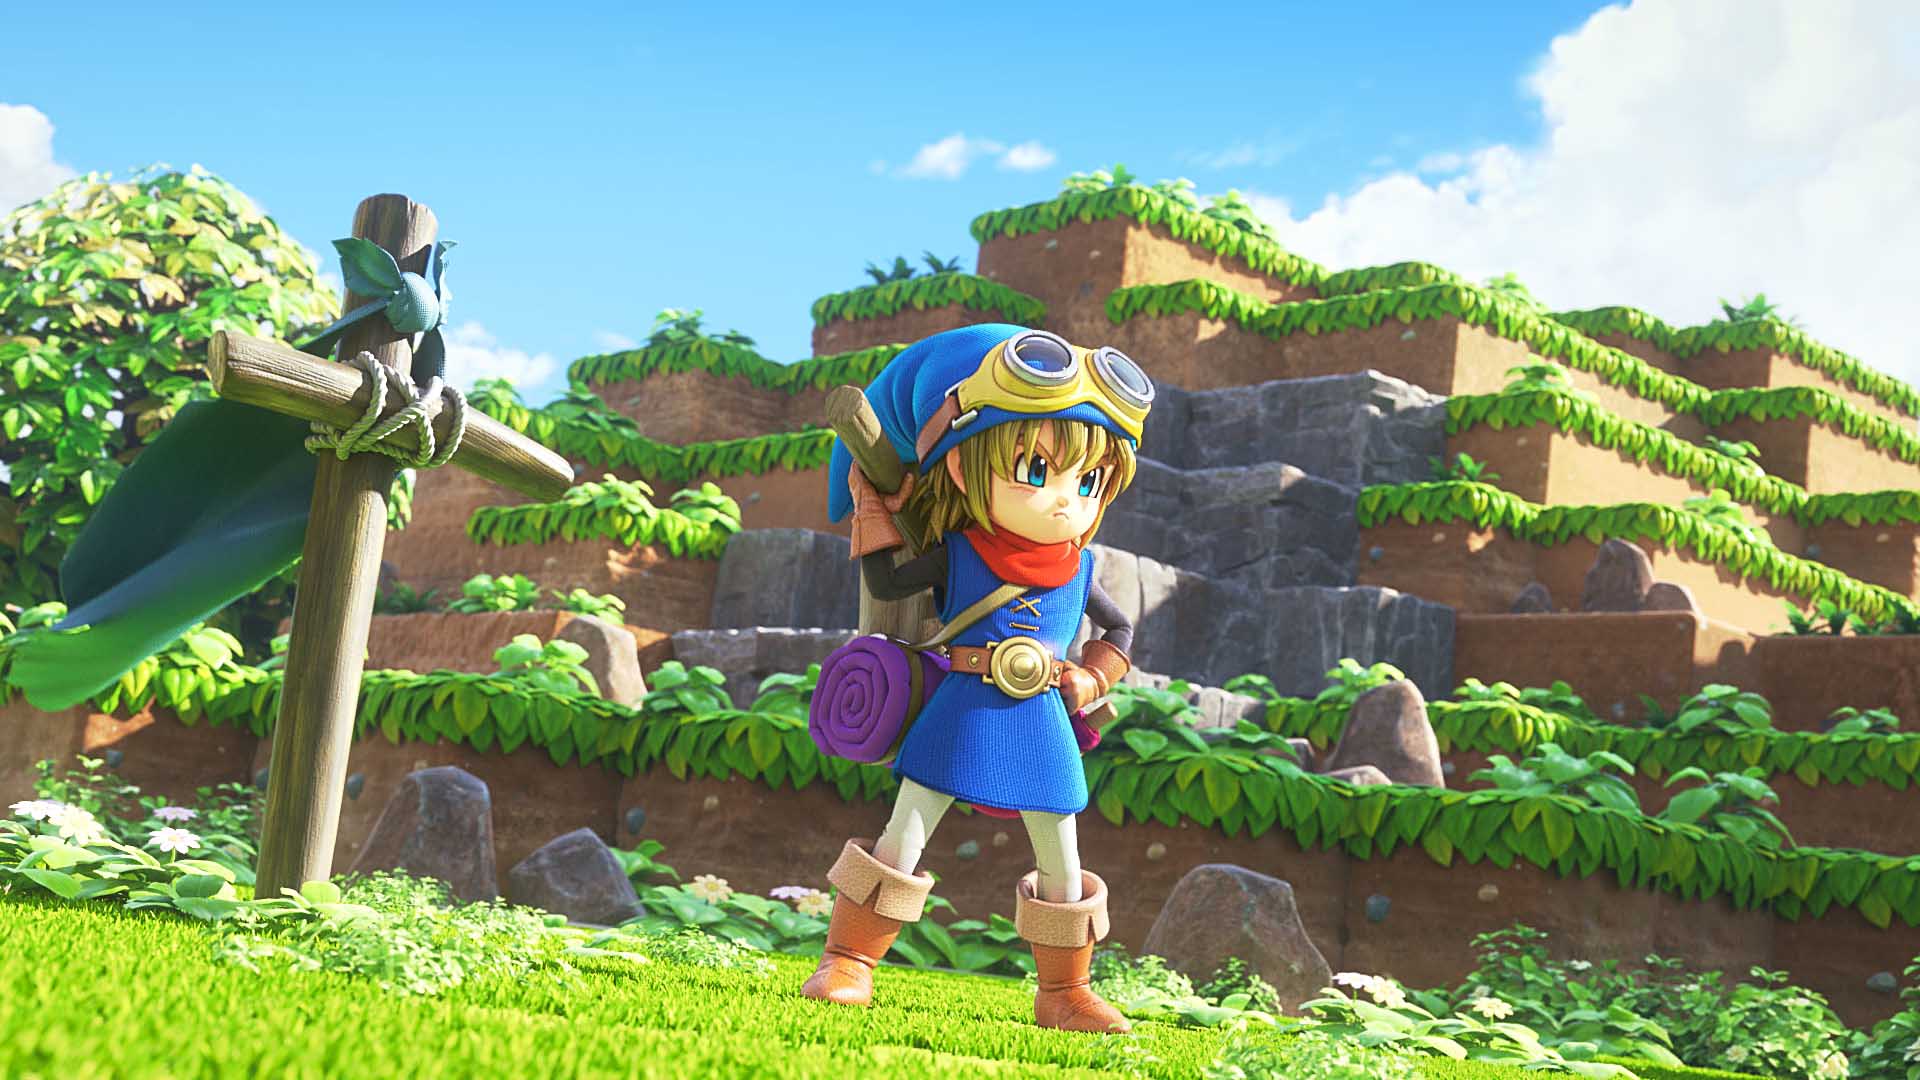 Review Dragon Quest Builders On Nintendo Switch Nintendo Wire